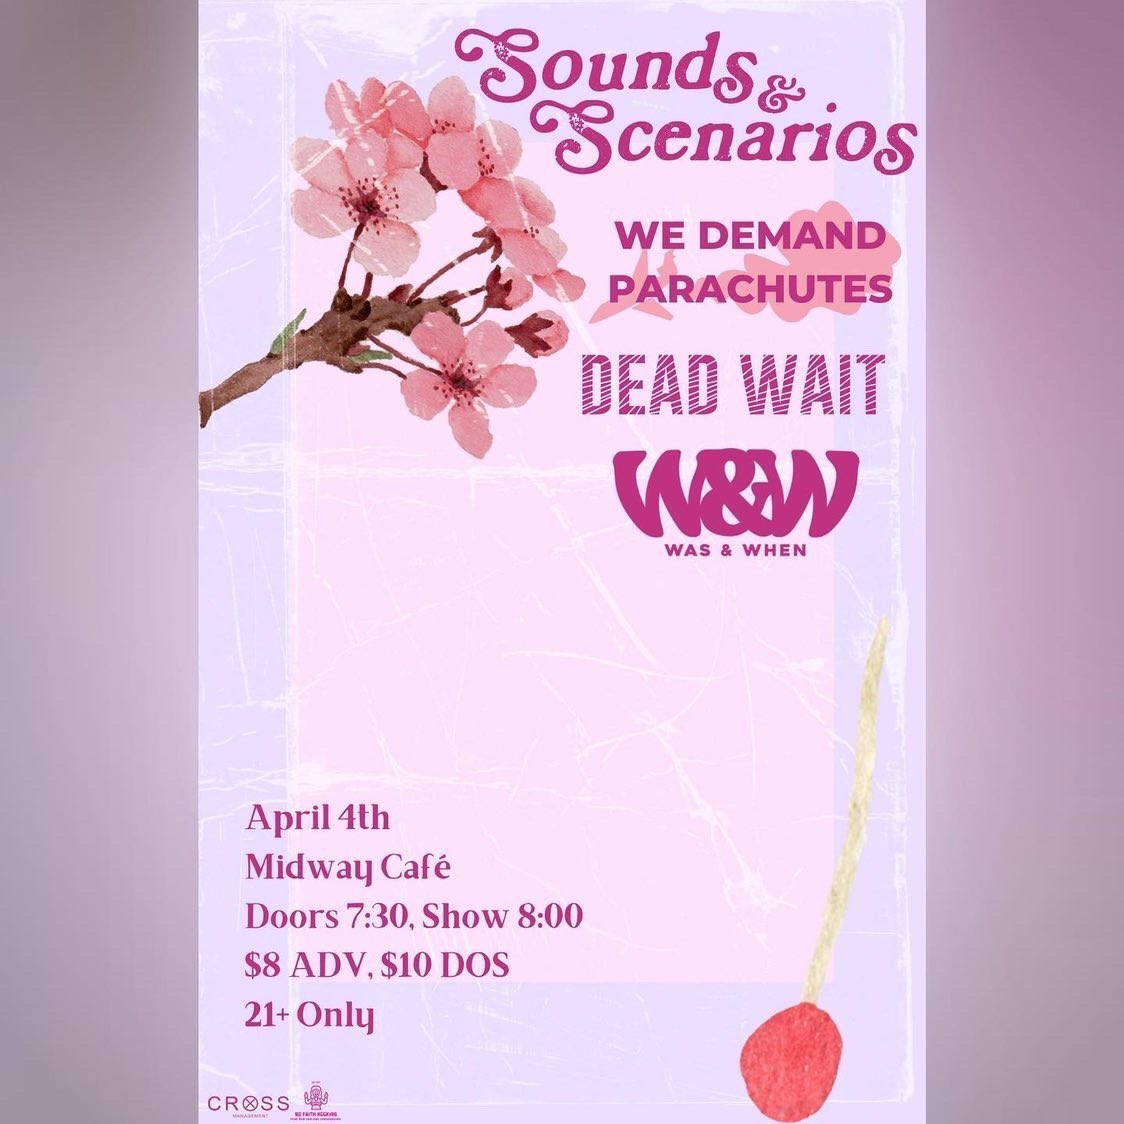 Super stoked to welcome @DeadWaitMa to this bill on April 4! See you at @themidwayjp 🤘